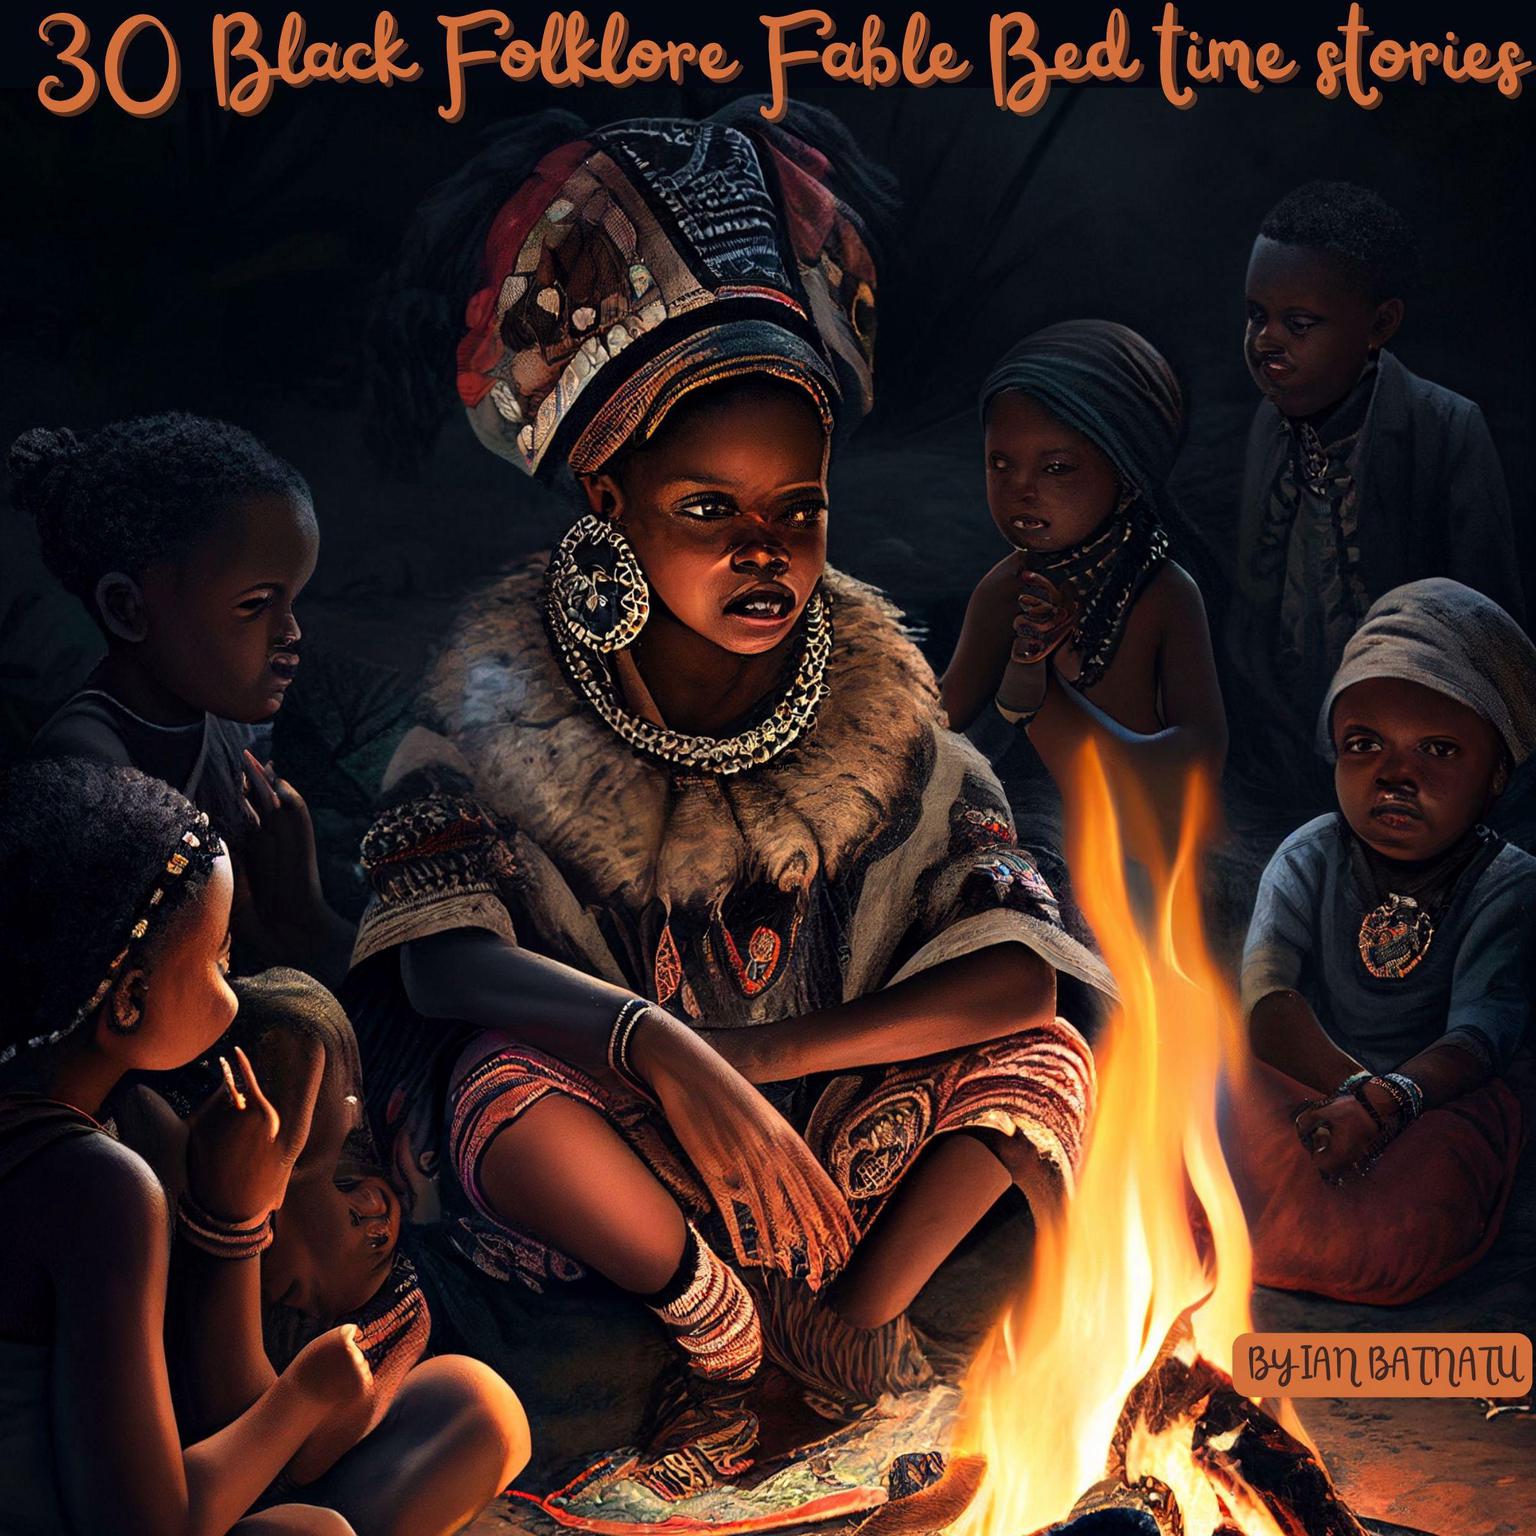 30 Black Folklore Fable Bed time Stories Audiobook, by Ian Batantu